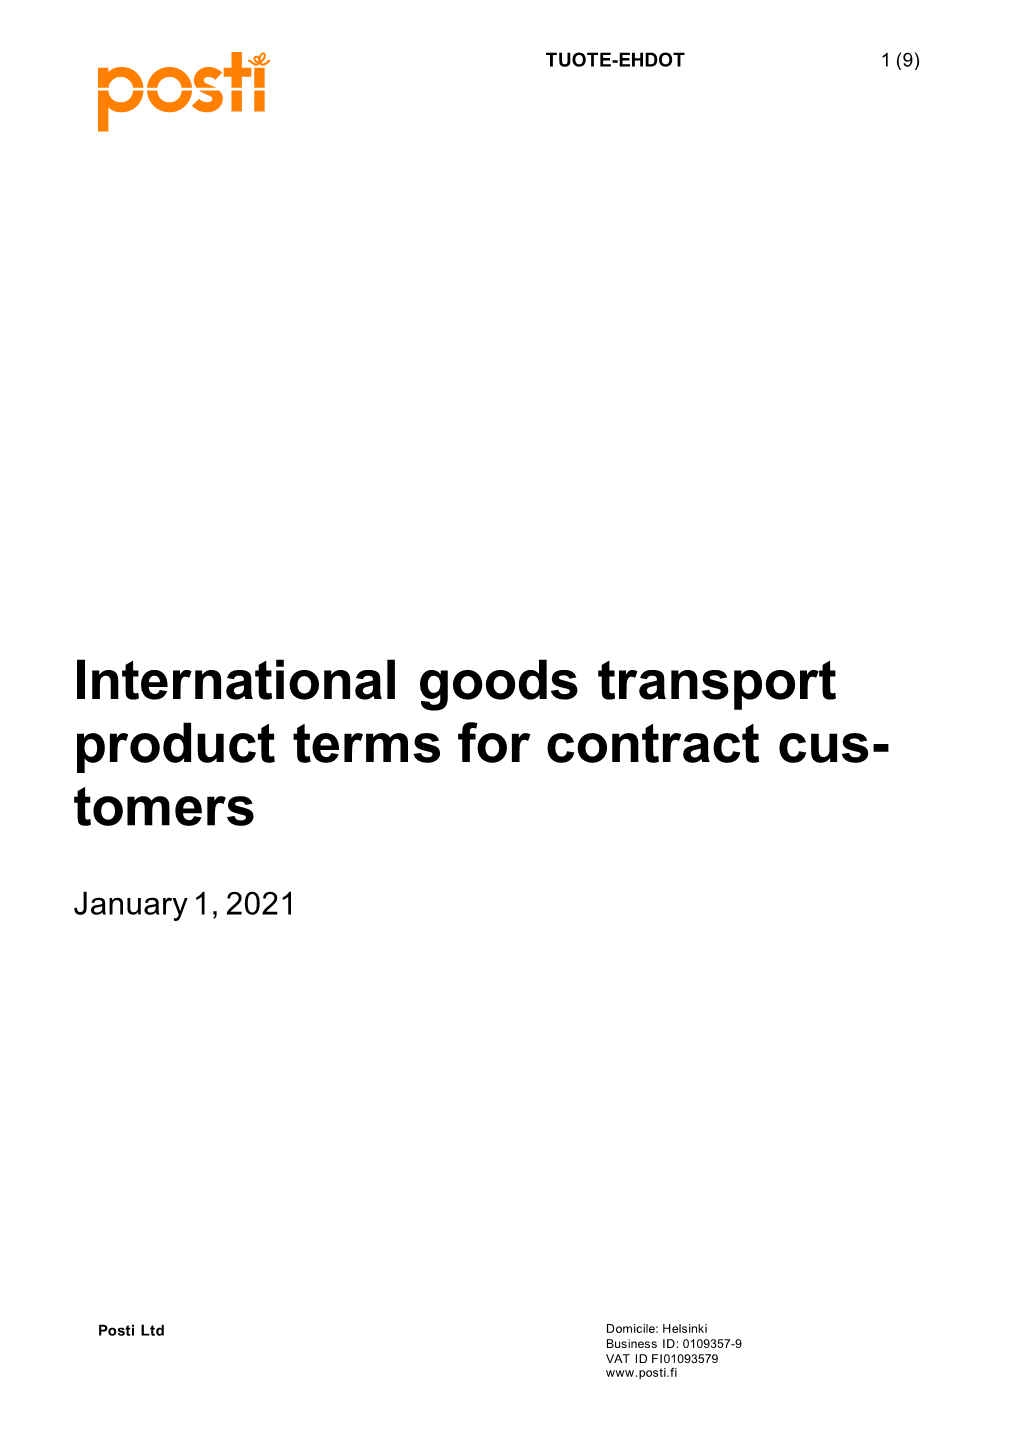 International Goods Transport Product Terms for Contract Customers